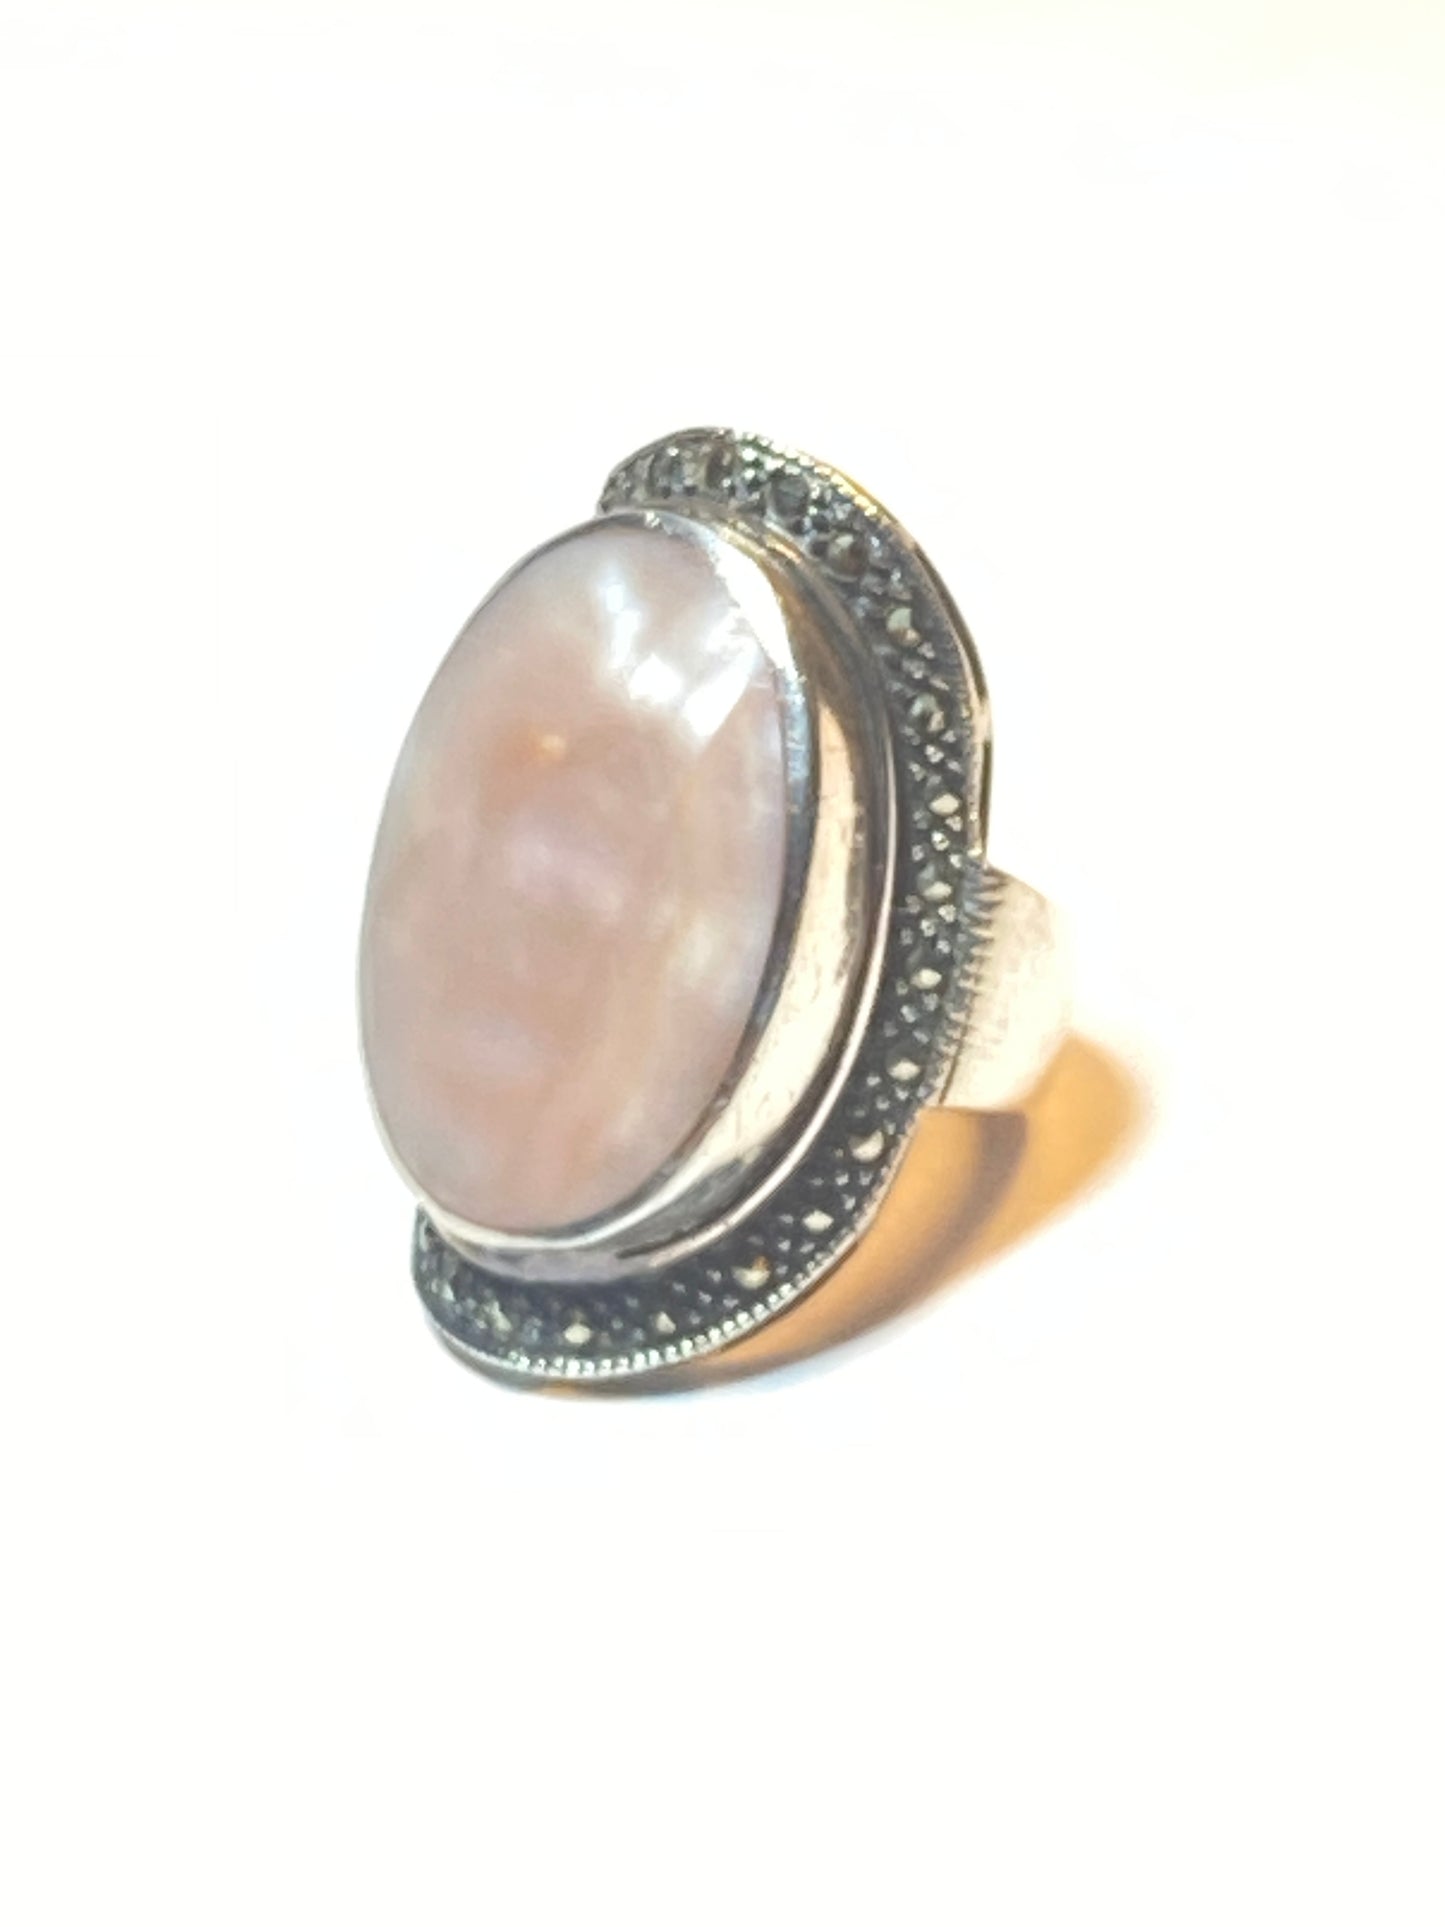 Mother of Pearl ring marcasite cigar band MOP chunky sterling silver women